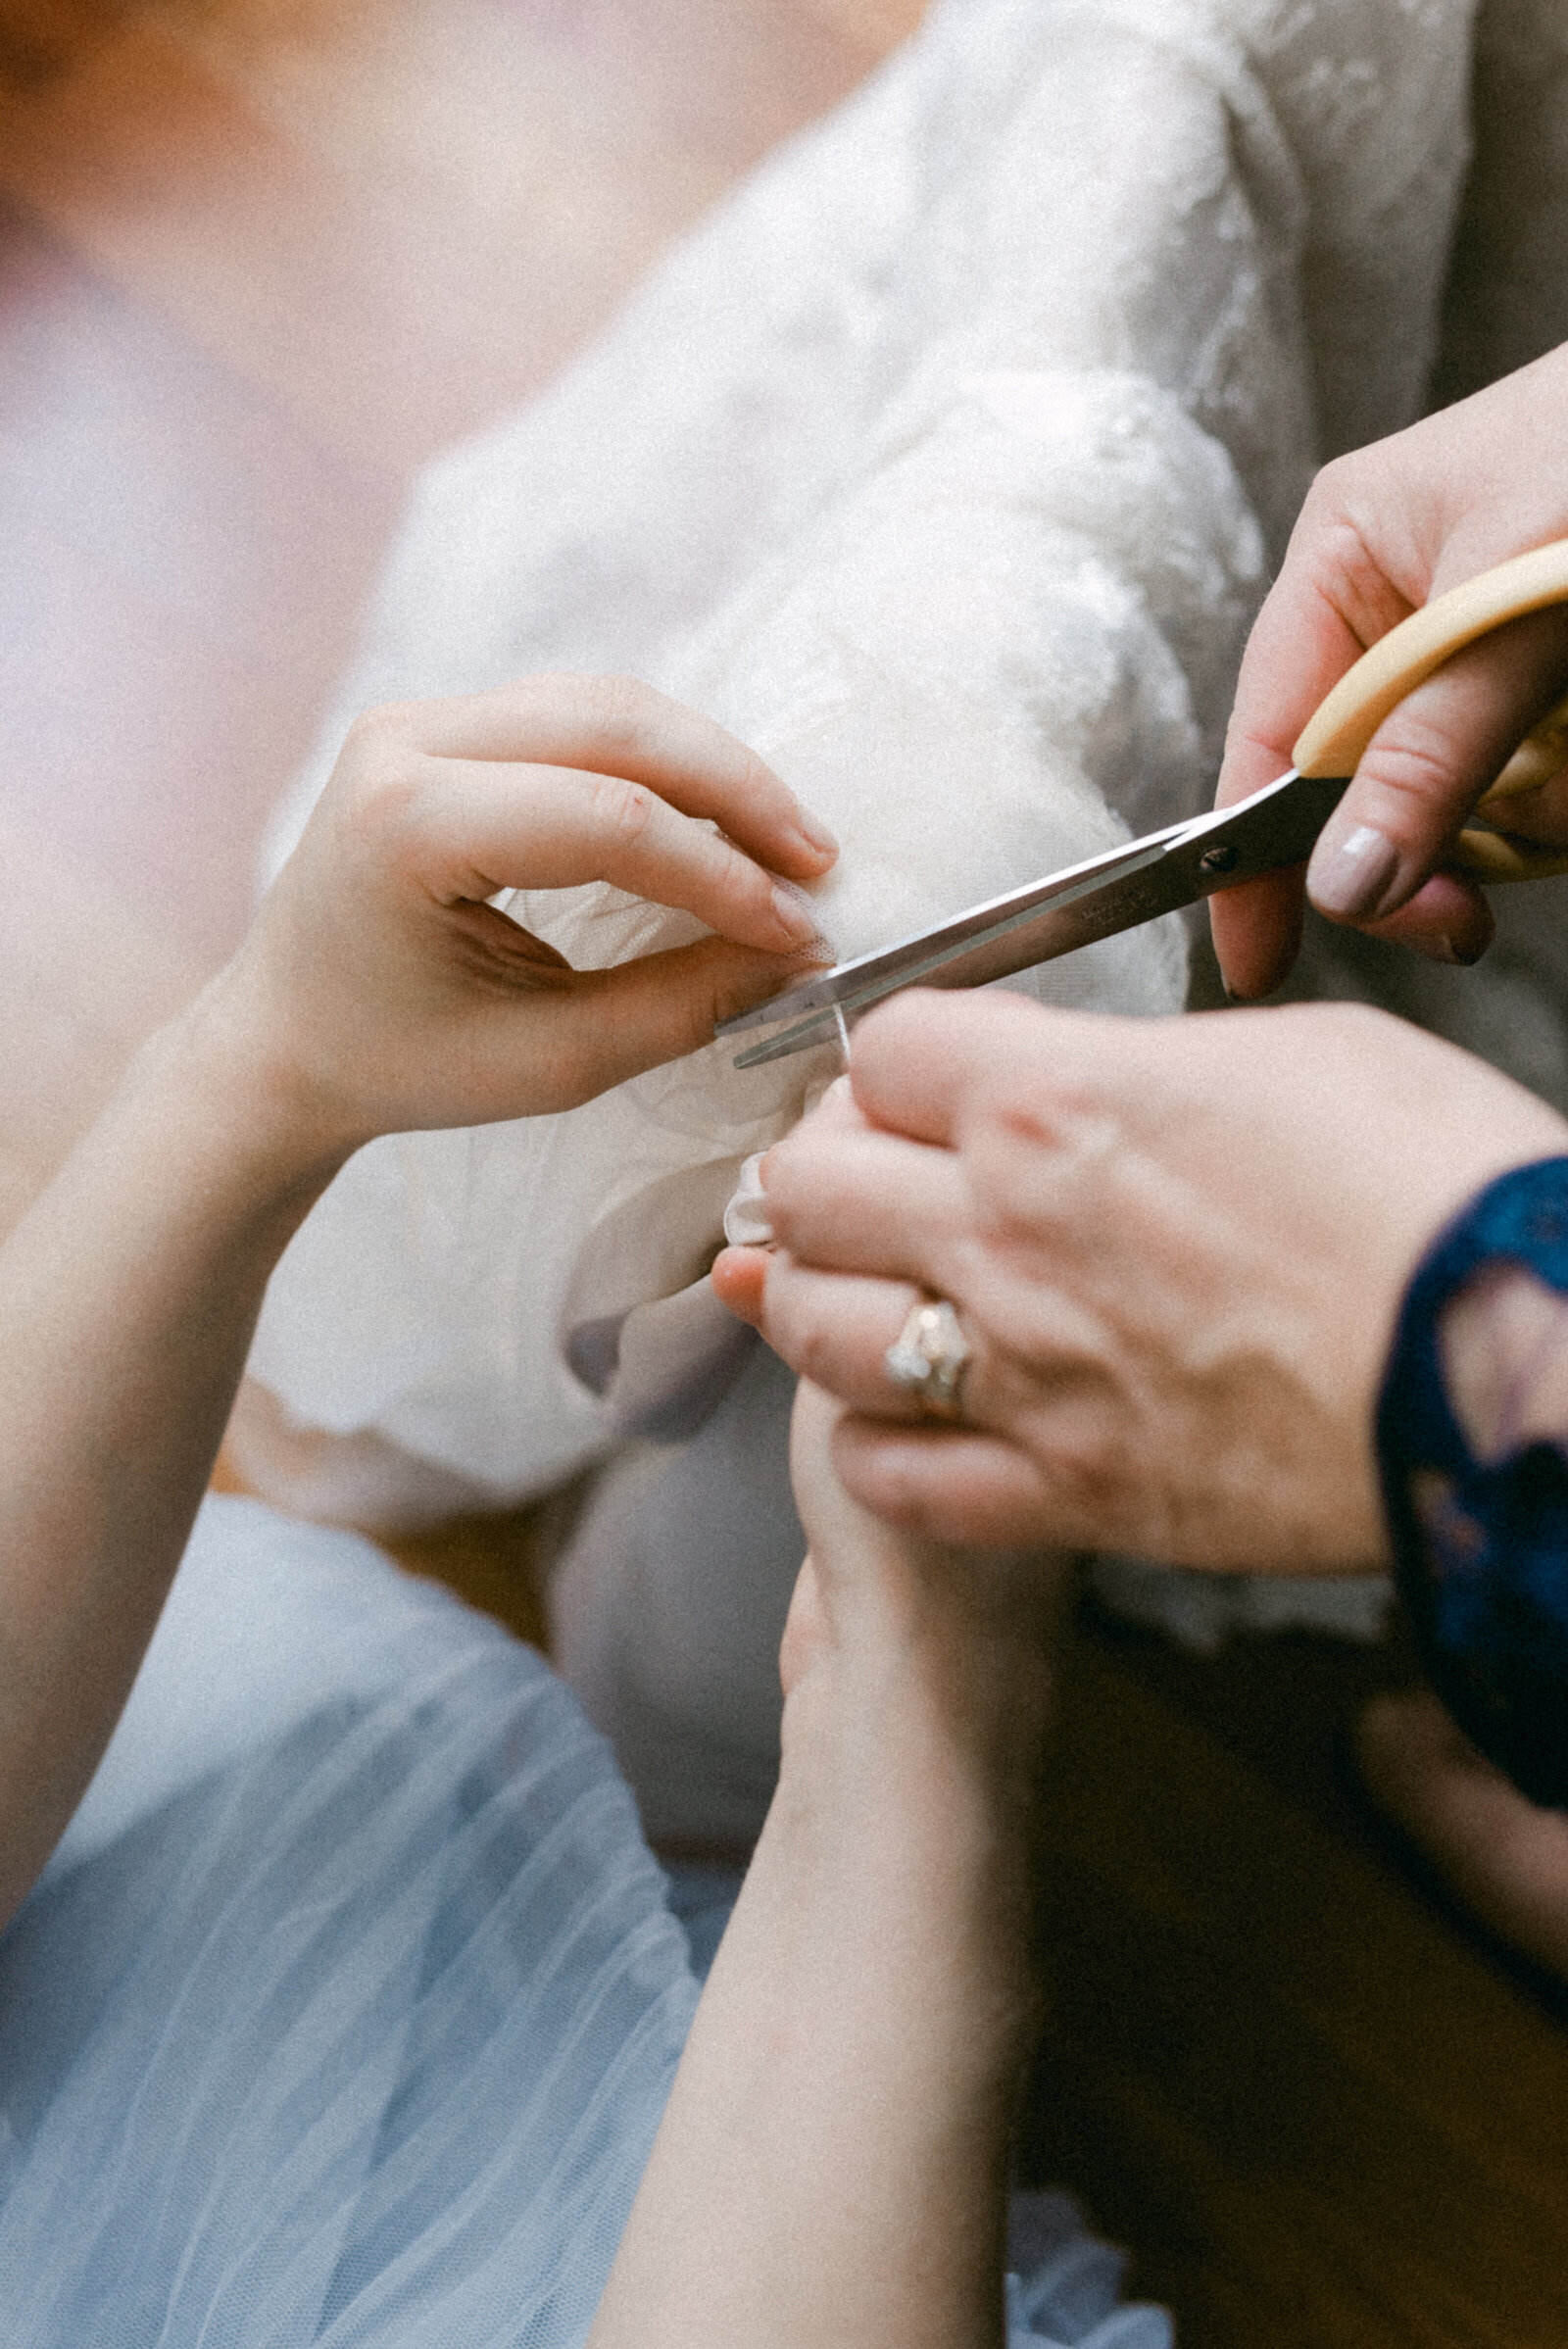 Bride's mother is cutting a string on the wedding dress in an image photographed by wedding photographer Hannika Gabrielsson.